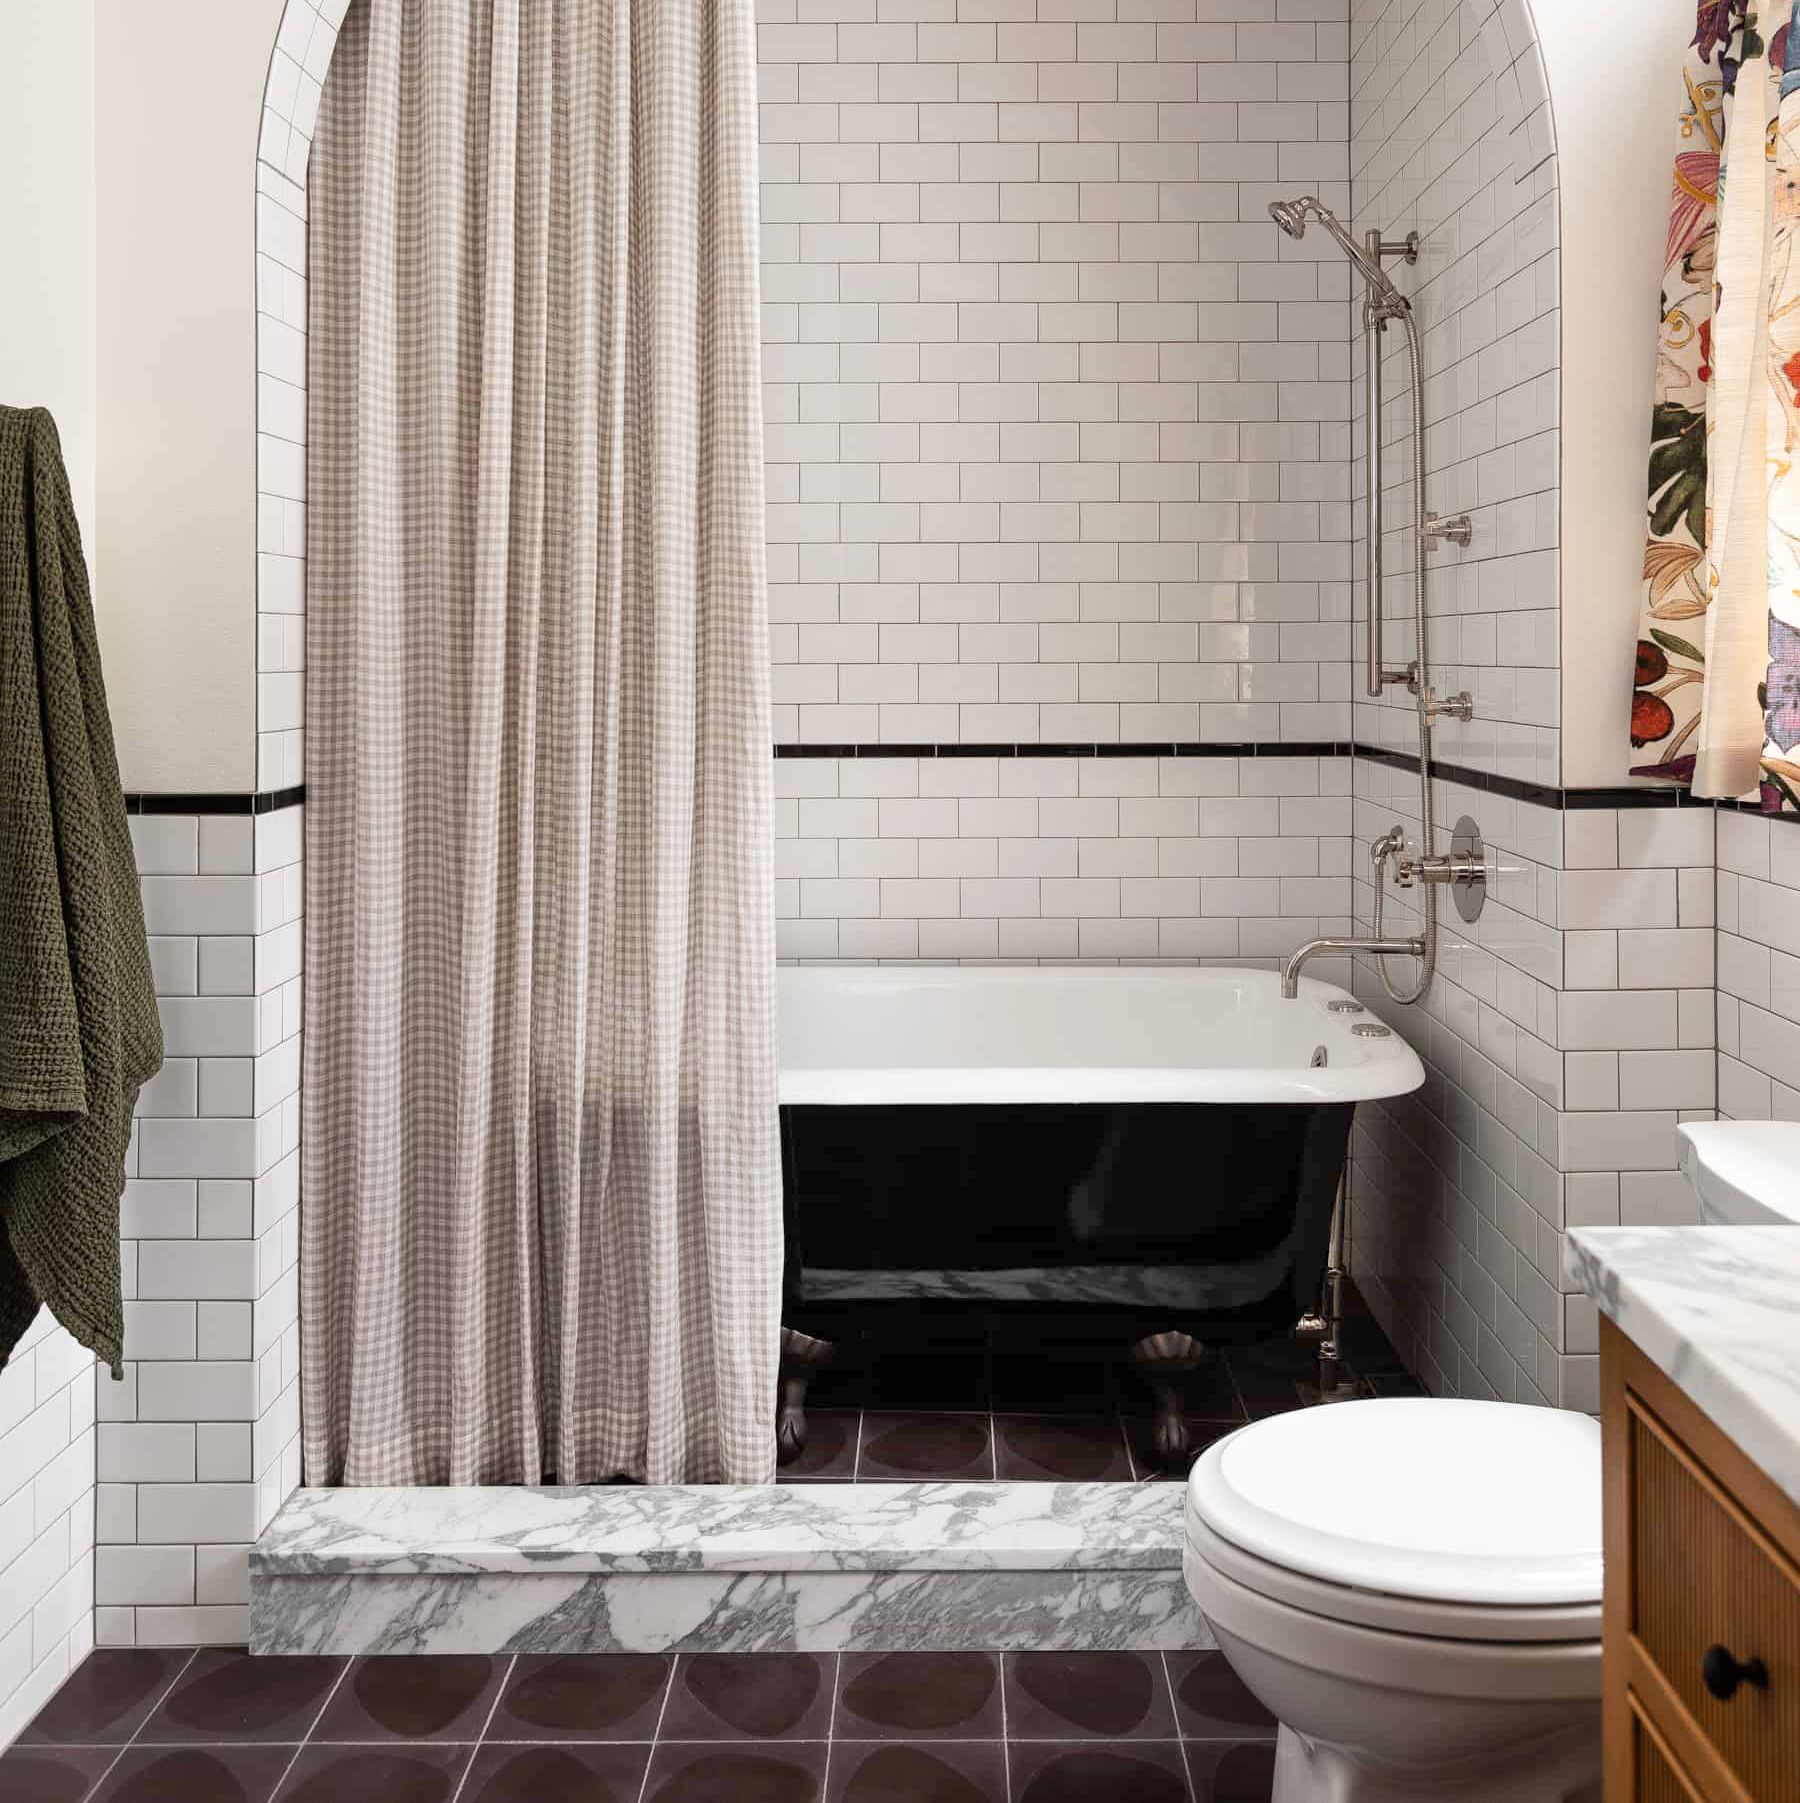 The 55 Coolest Bathroom Tile Ideas and Designs to Recreate in Your Home